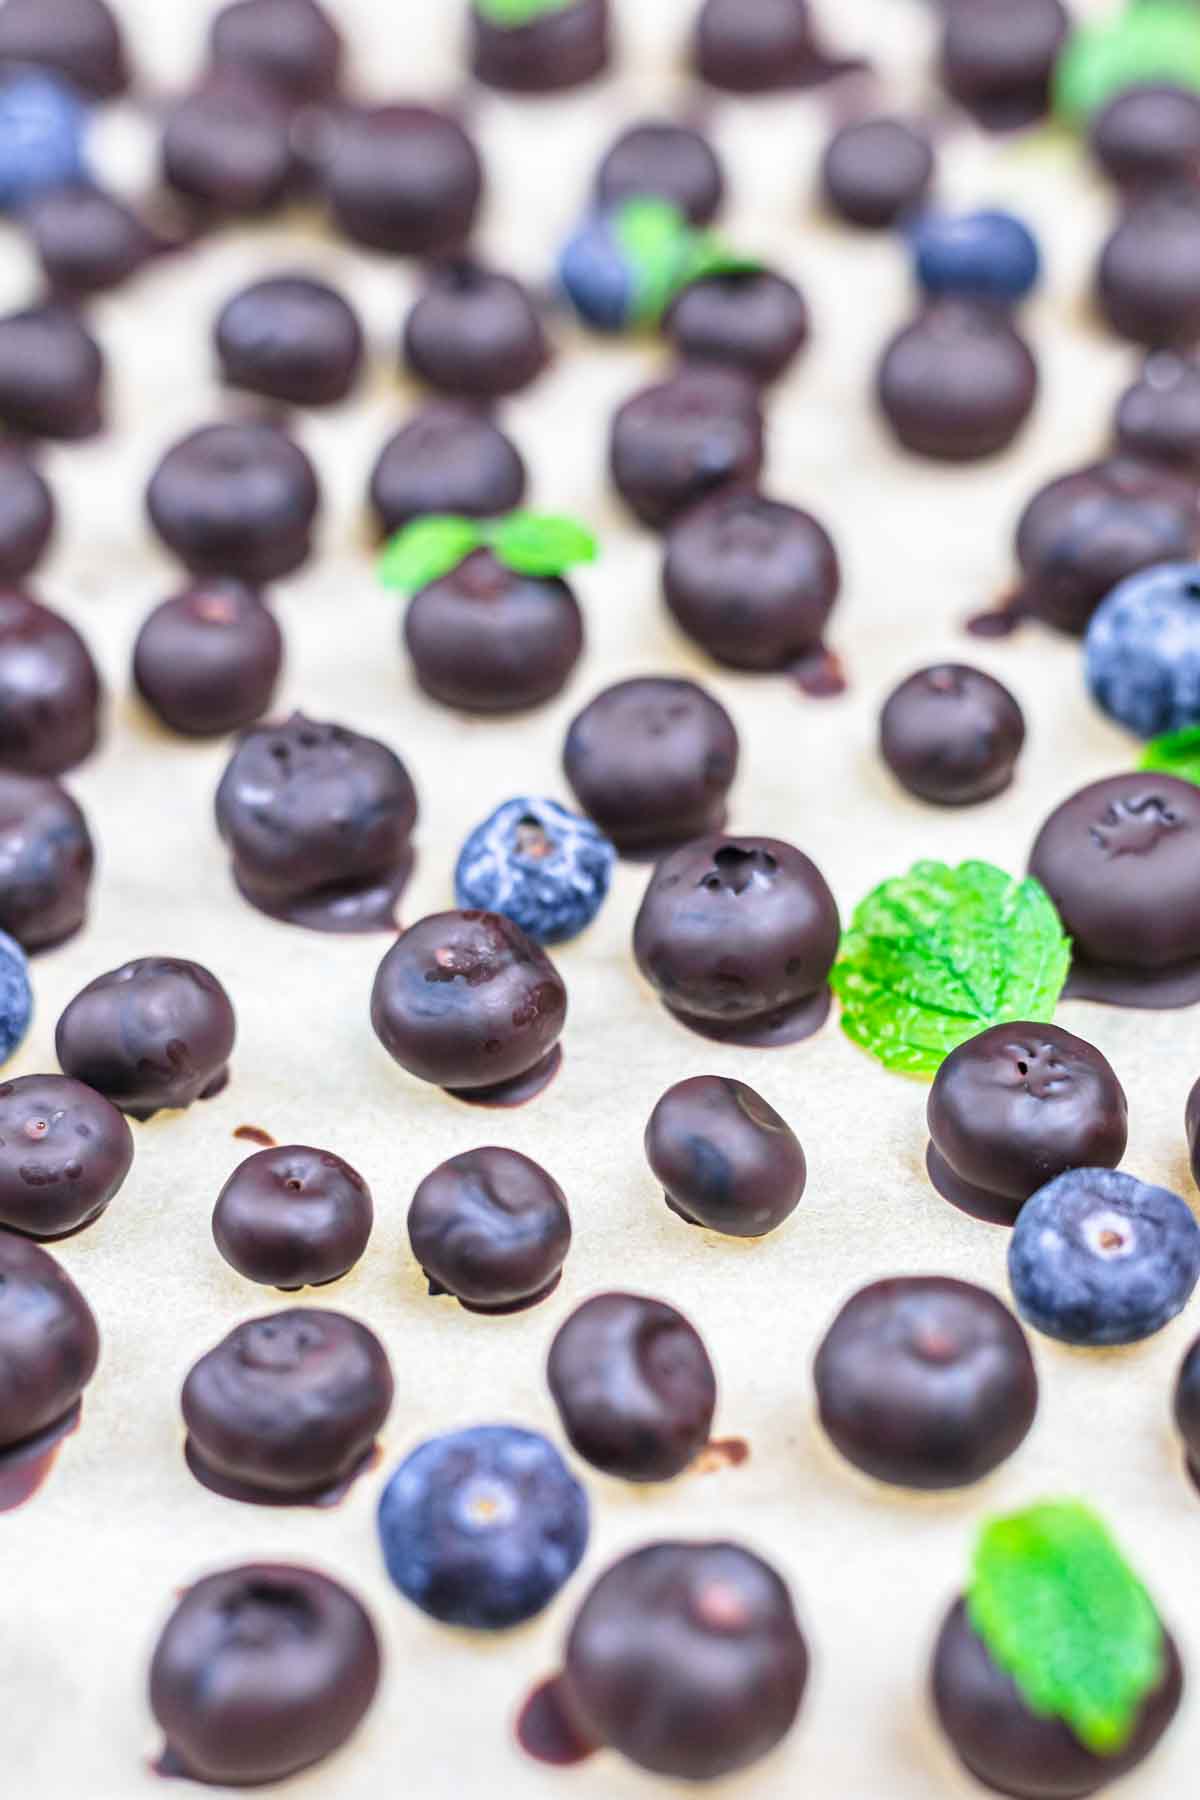 Chocolate covered blueberries with mint leaves.